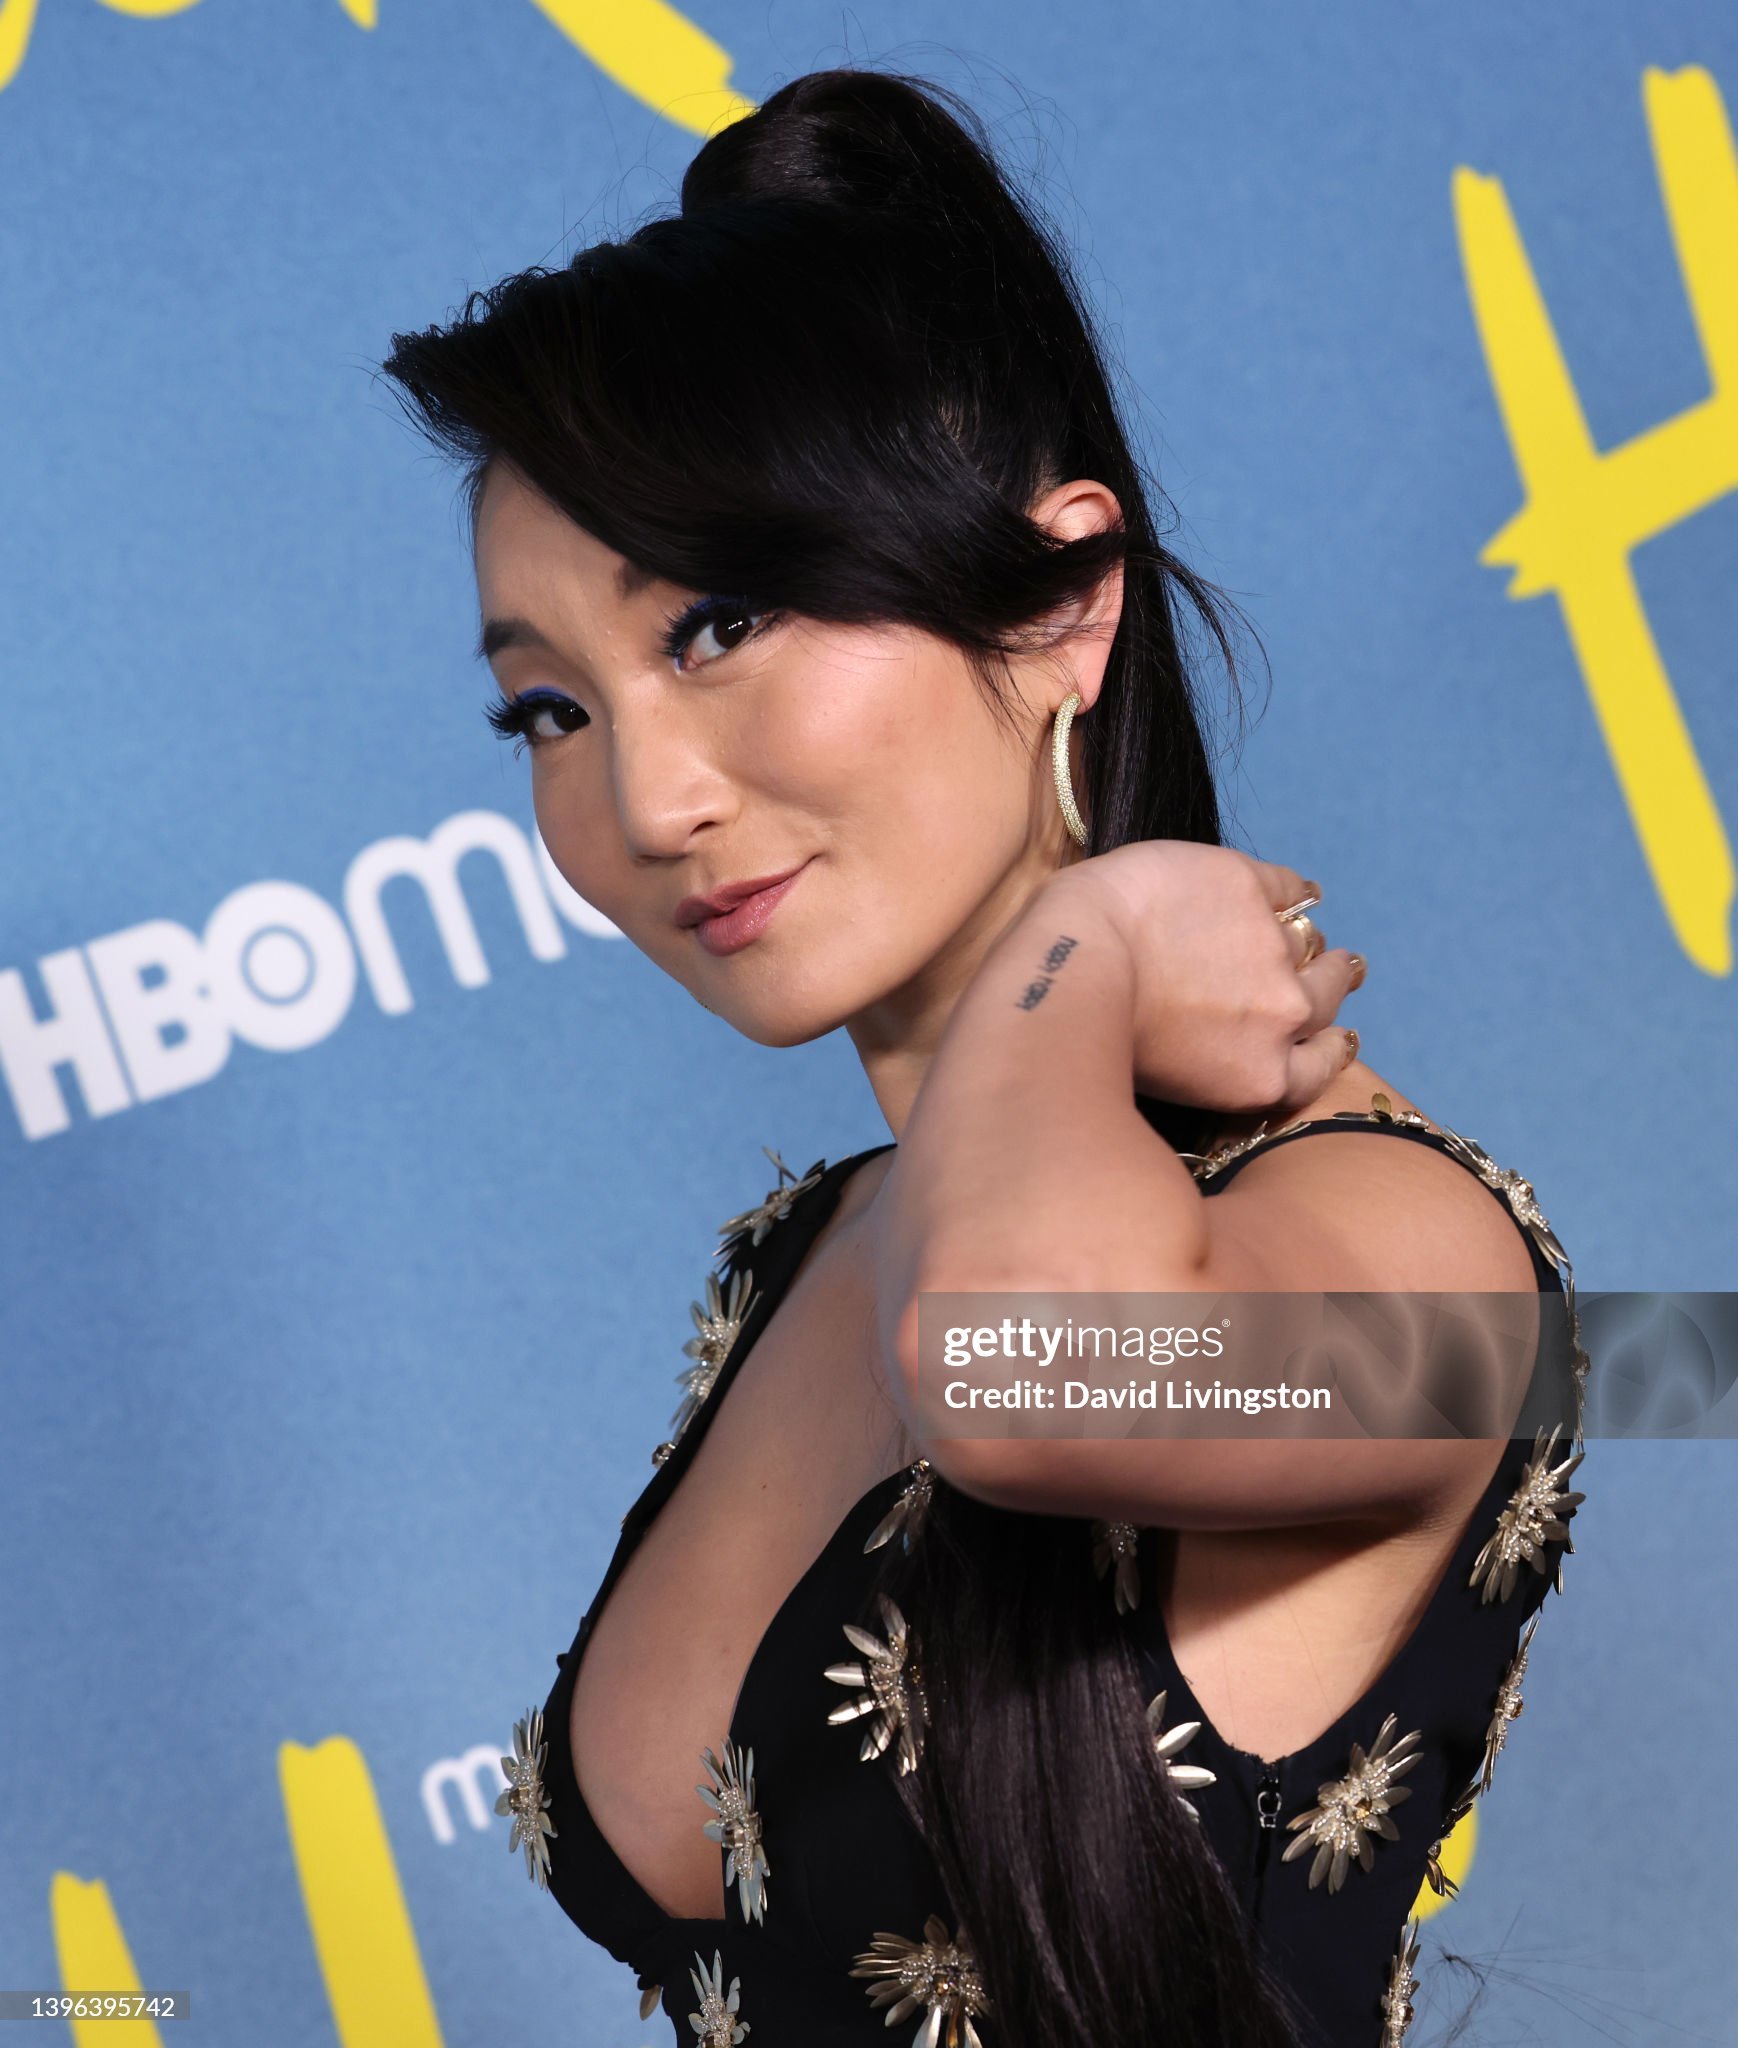 gettyimages-1396395742-2048x2048.jpg